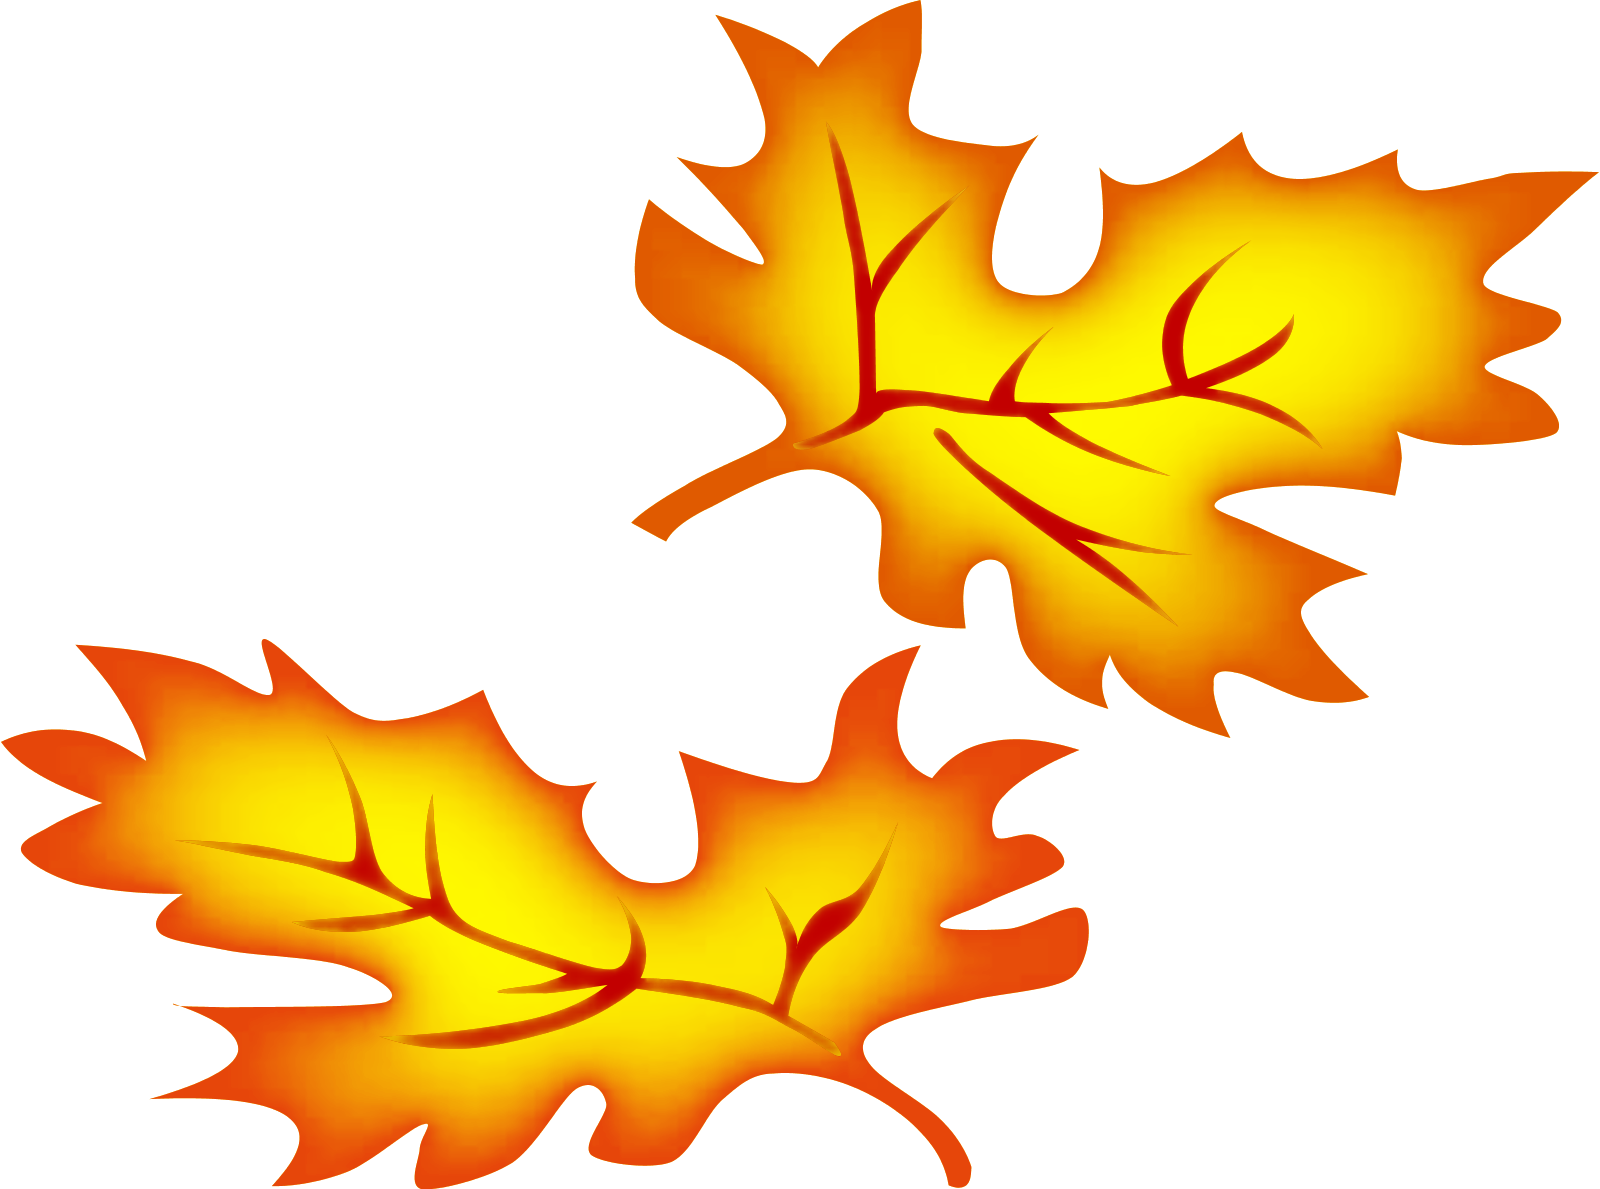 Blowing Fall Leaves Clipart | Clipart Panda - Free Clipart Images